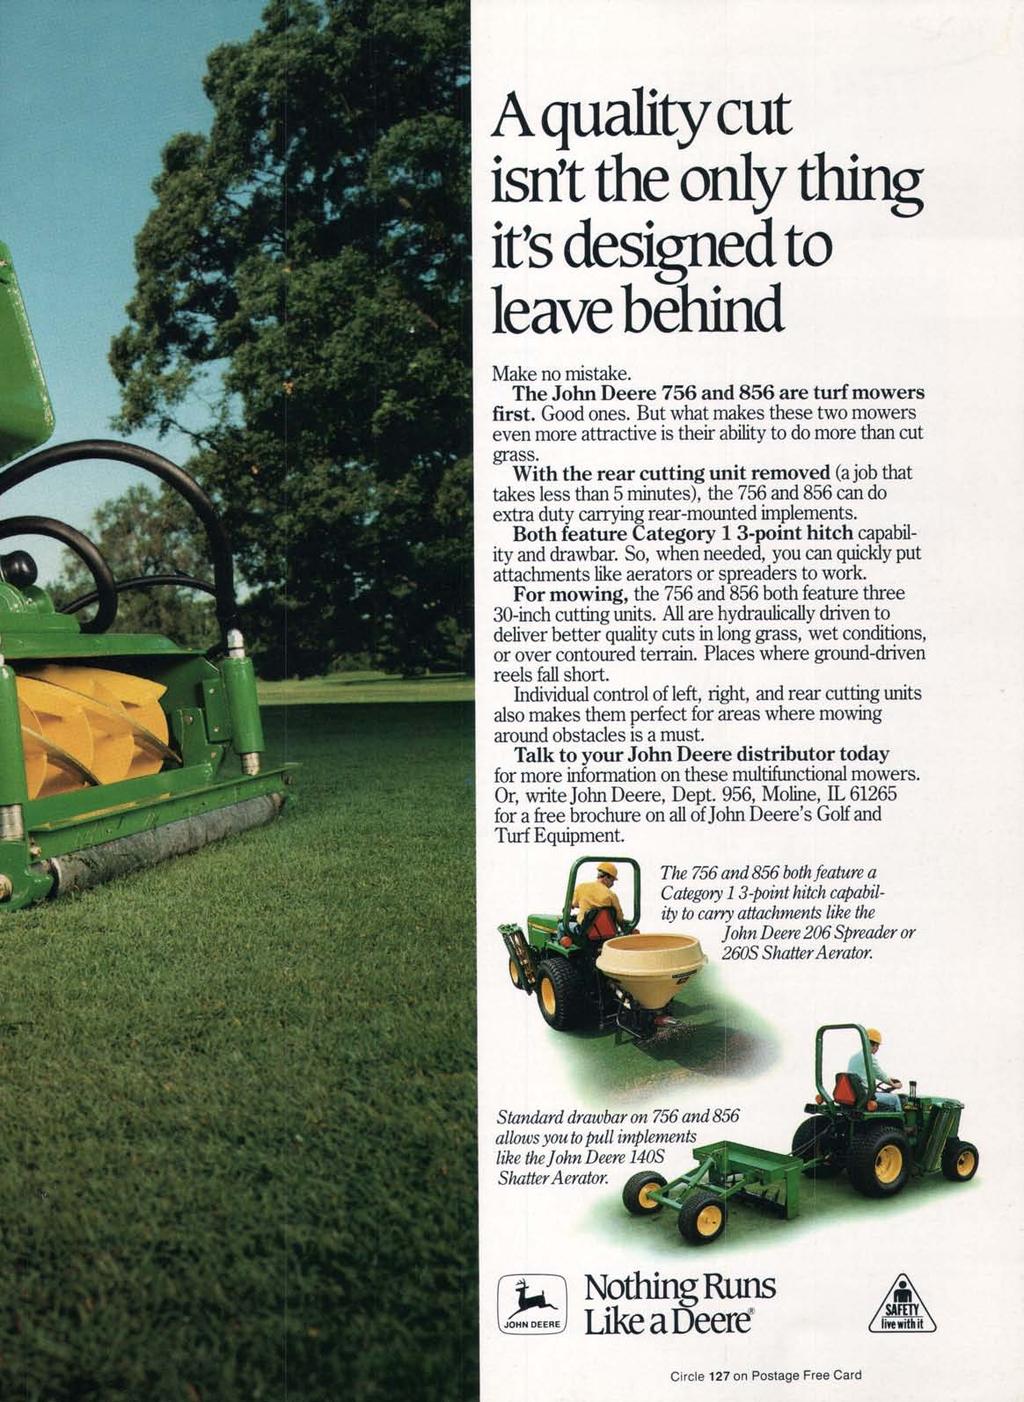 Aquality cut isn't the only thing it's designed to leave behind Make no mistake. The John Deere 756 and 856 are turf mowers first. Good ones.